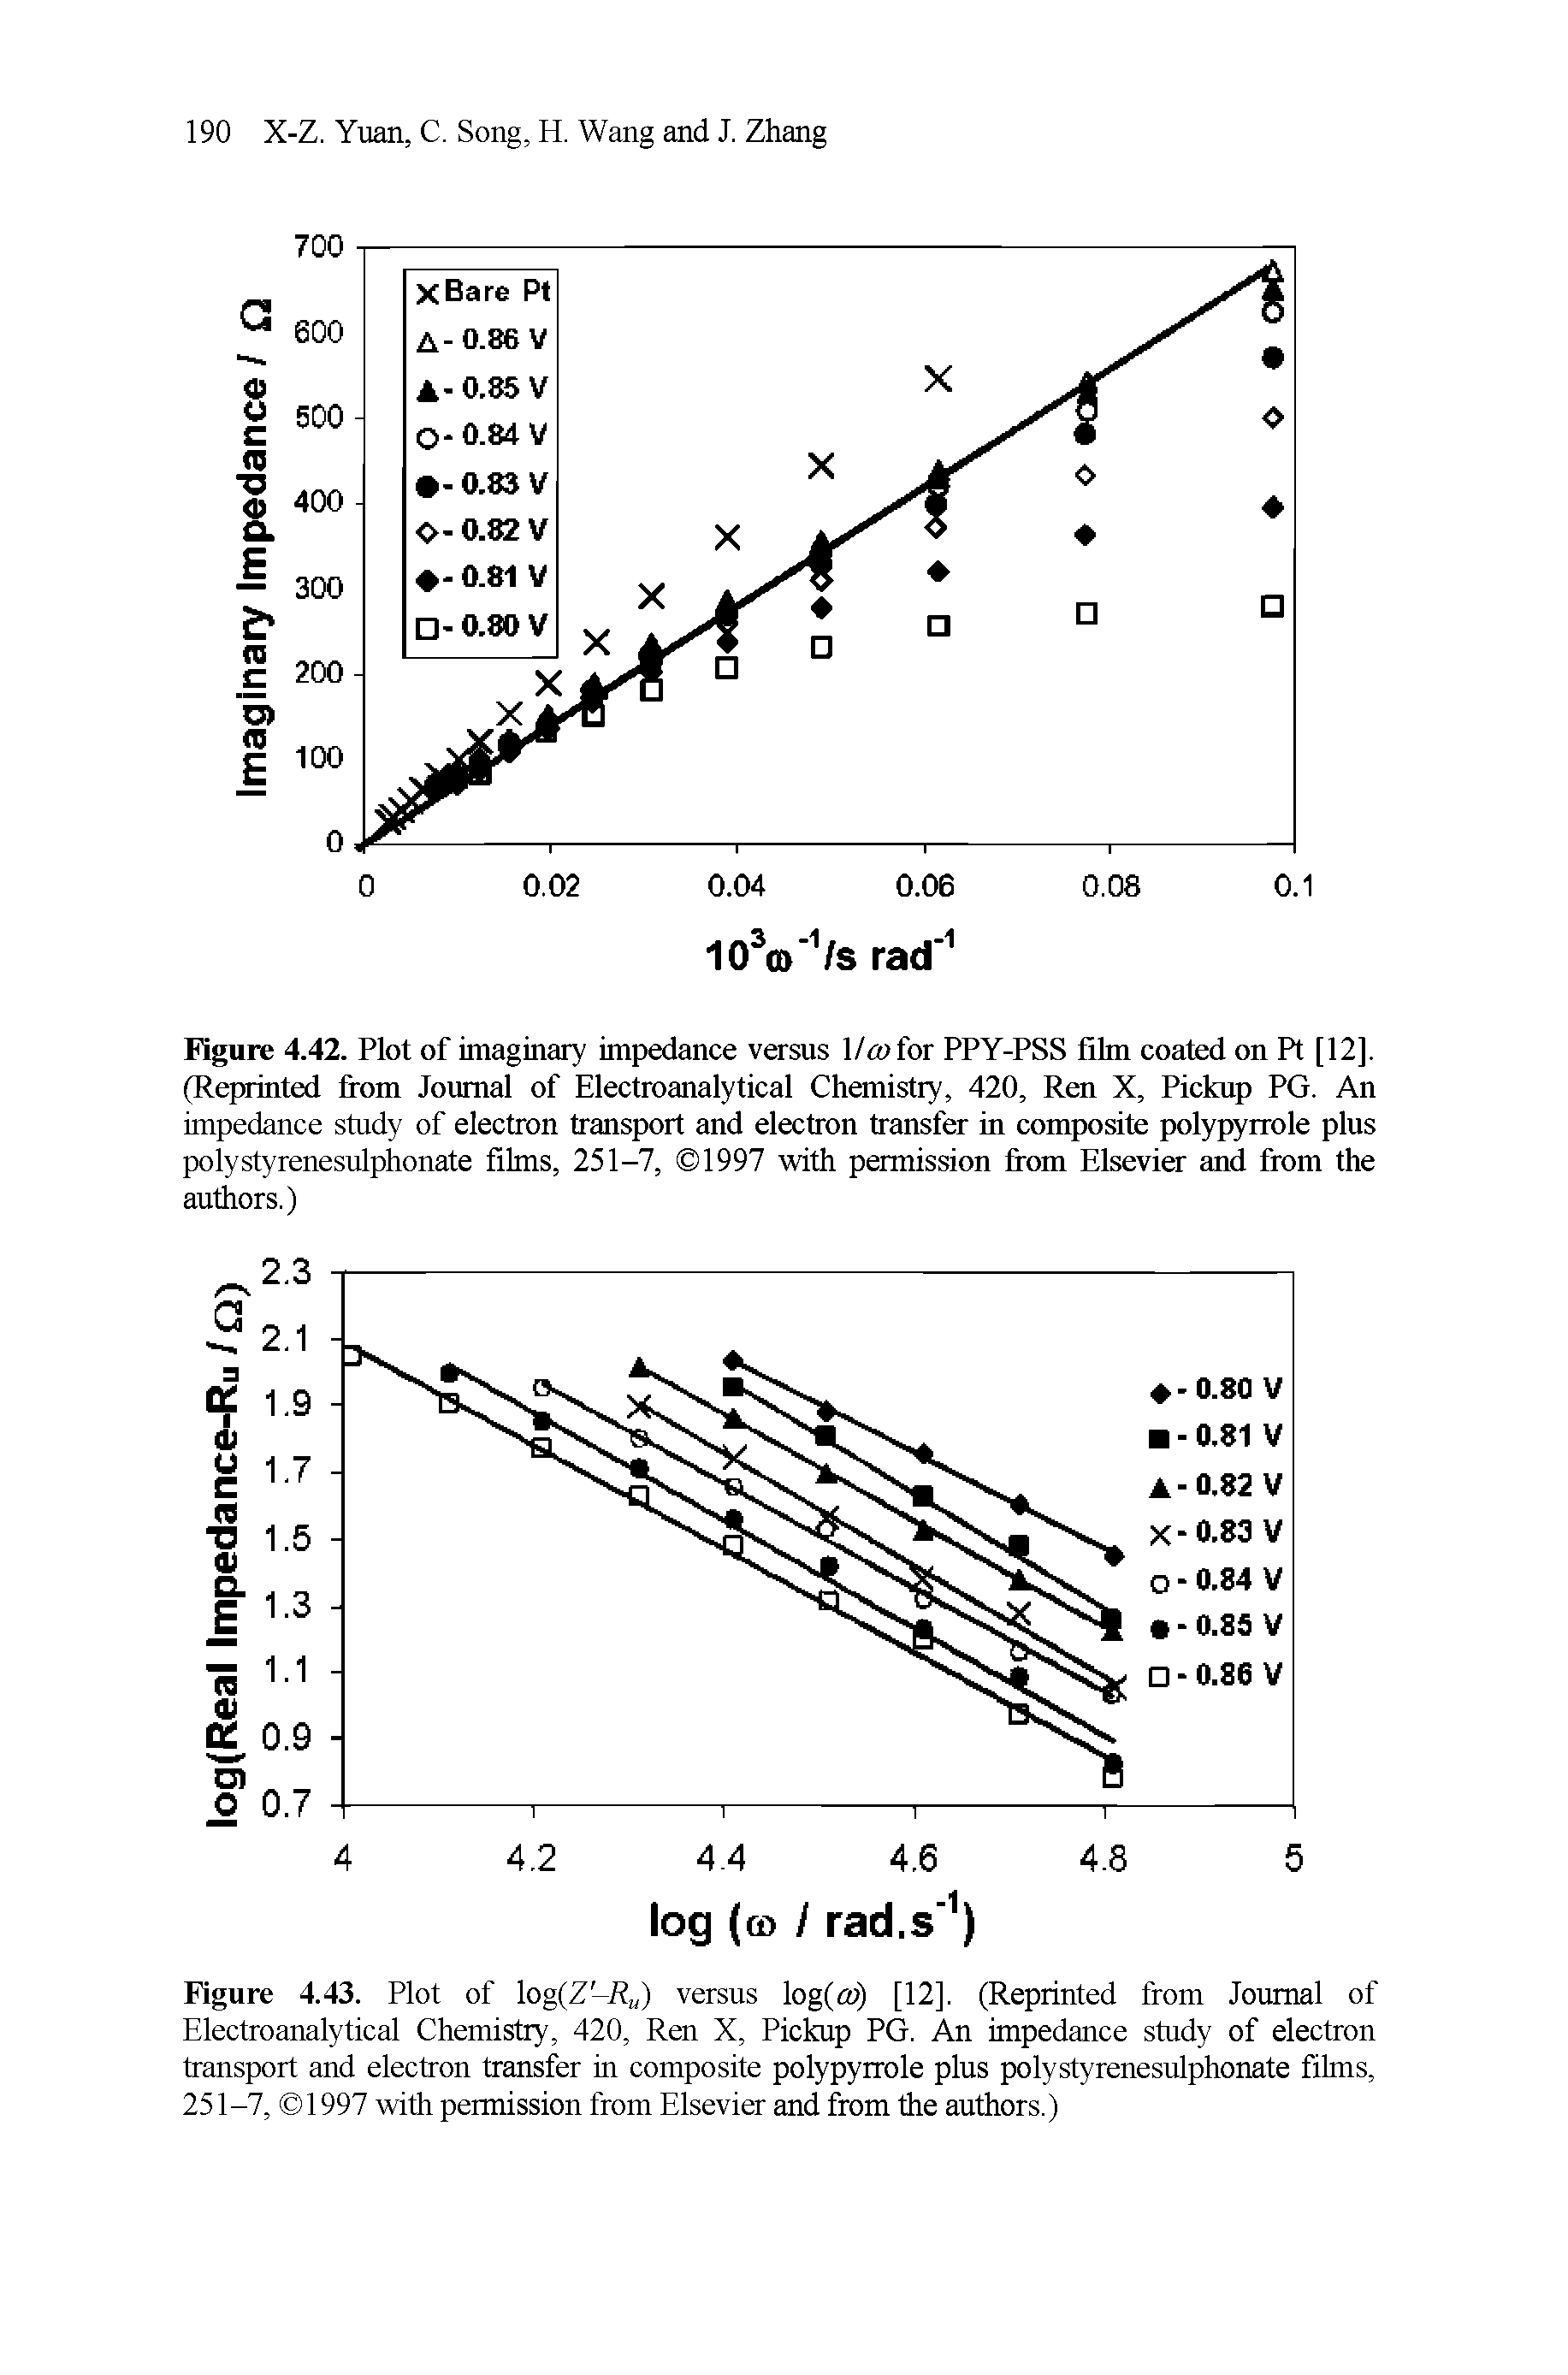 Figure 4.42. Plot of imaginary impedance versus 1/tufor PPY-PSS film coated on Pt [12]. (Reprinted from Journal of Electroanalytical Chemistry, 420, Ren X, Pickup PG. An impedance study of electron transport and electron transfer in composite polypyrrole plus polystyrenesulphonate films, 251-7, 1997 with permission from Elsevier and from the authors.)...